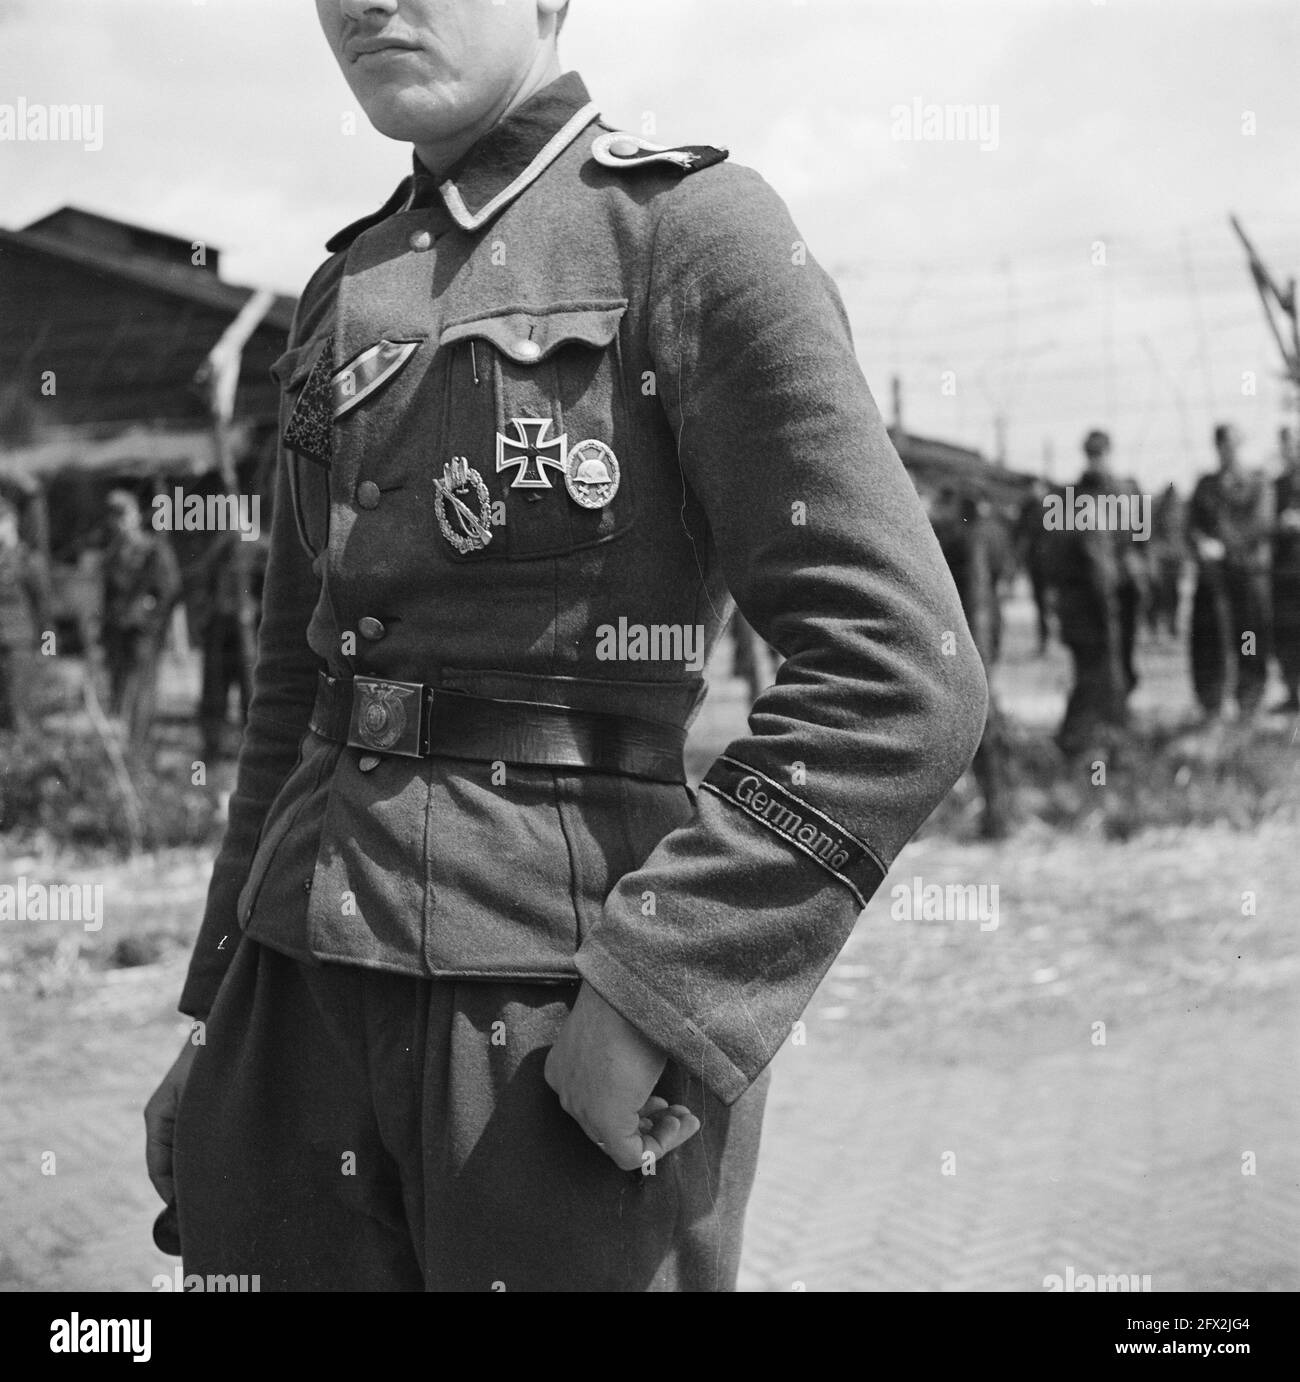 Man in uniform of the regiment Germania of the SS Wiking division with  various decorations (Ritterkreuz, Iron Cross 1st class), June 1945,  internment camps, prisoners of war, military, decorations, The Netherlands,  20th